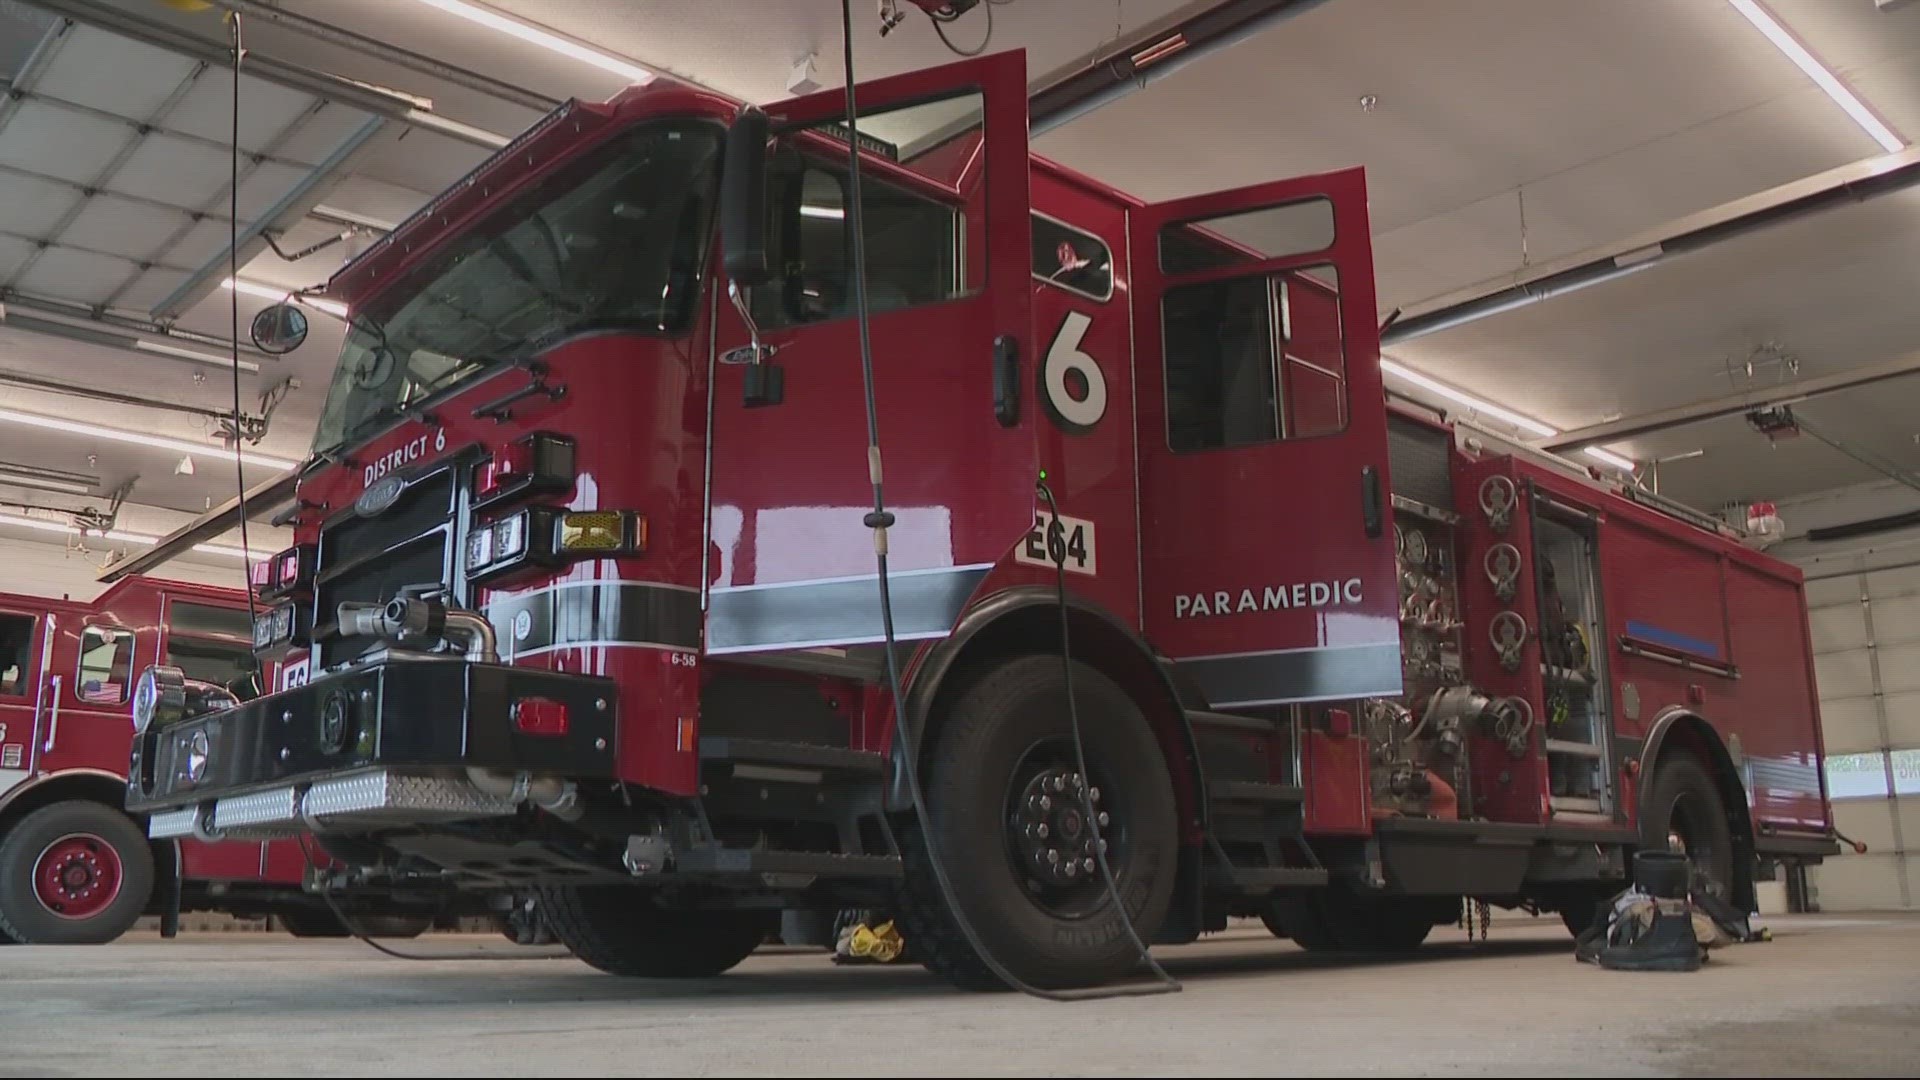 The Clark County Fire District, which serves about 80,000 residents, is looking to increase their funding levy to keep up with the region’s growth and inflation.